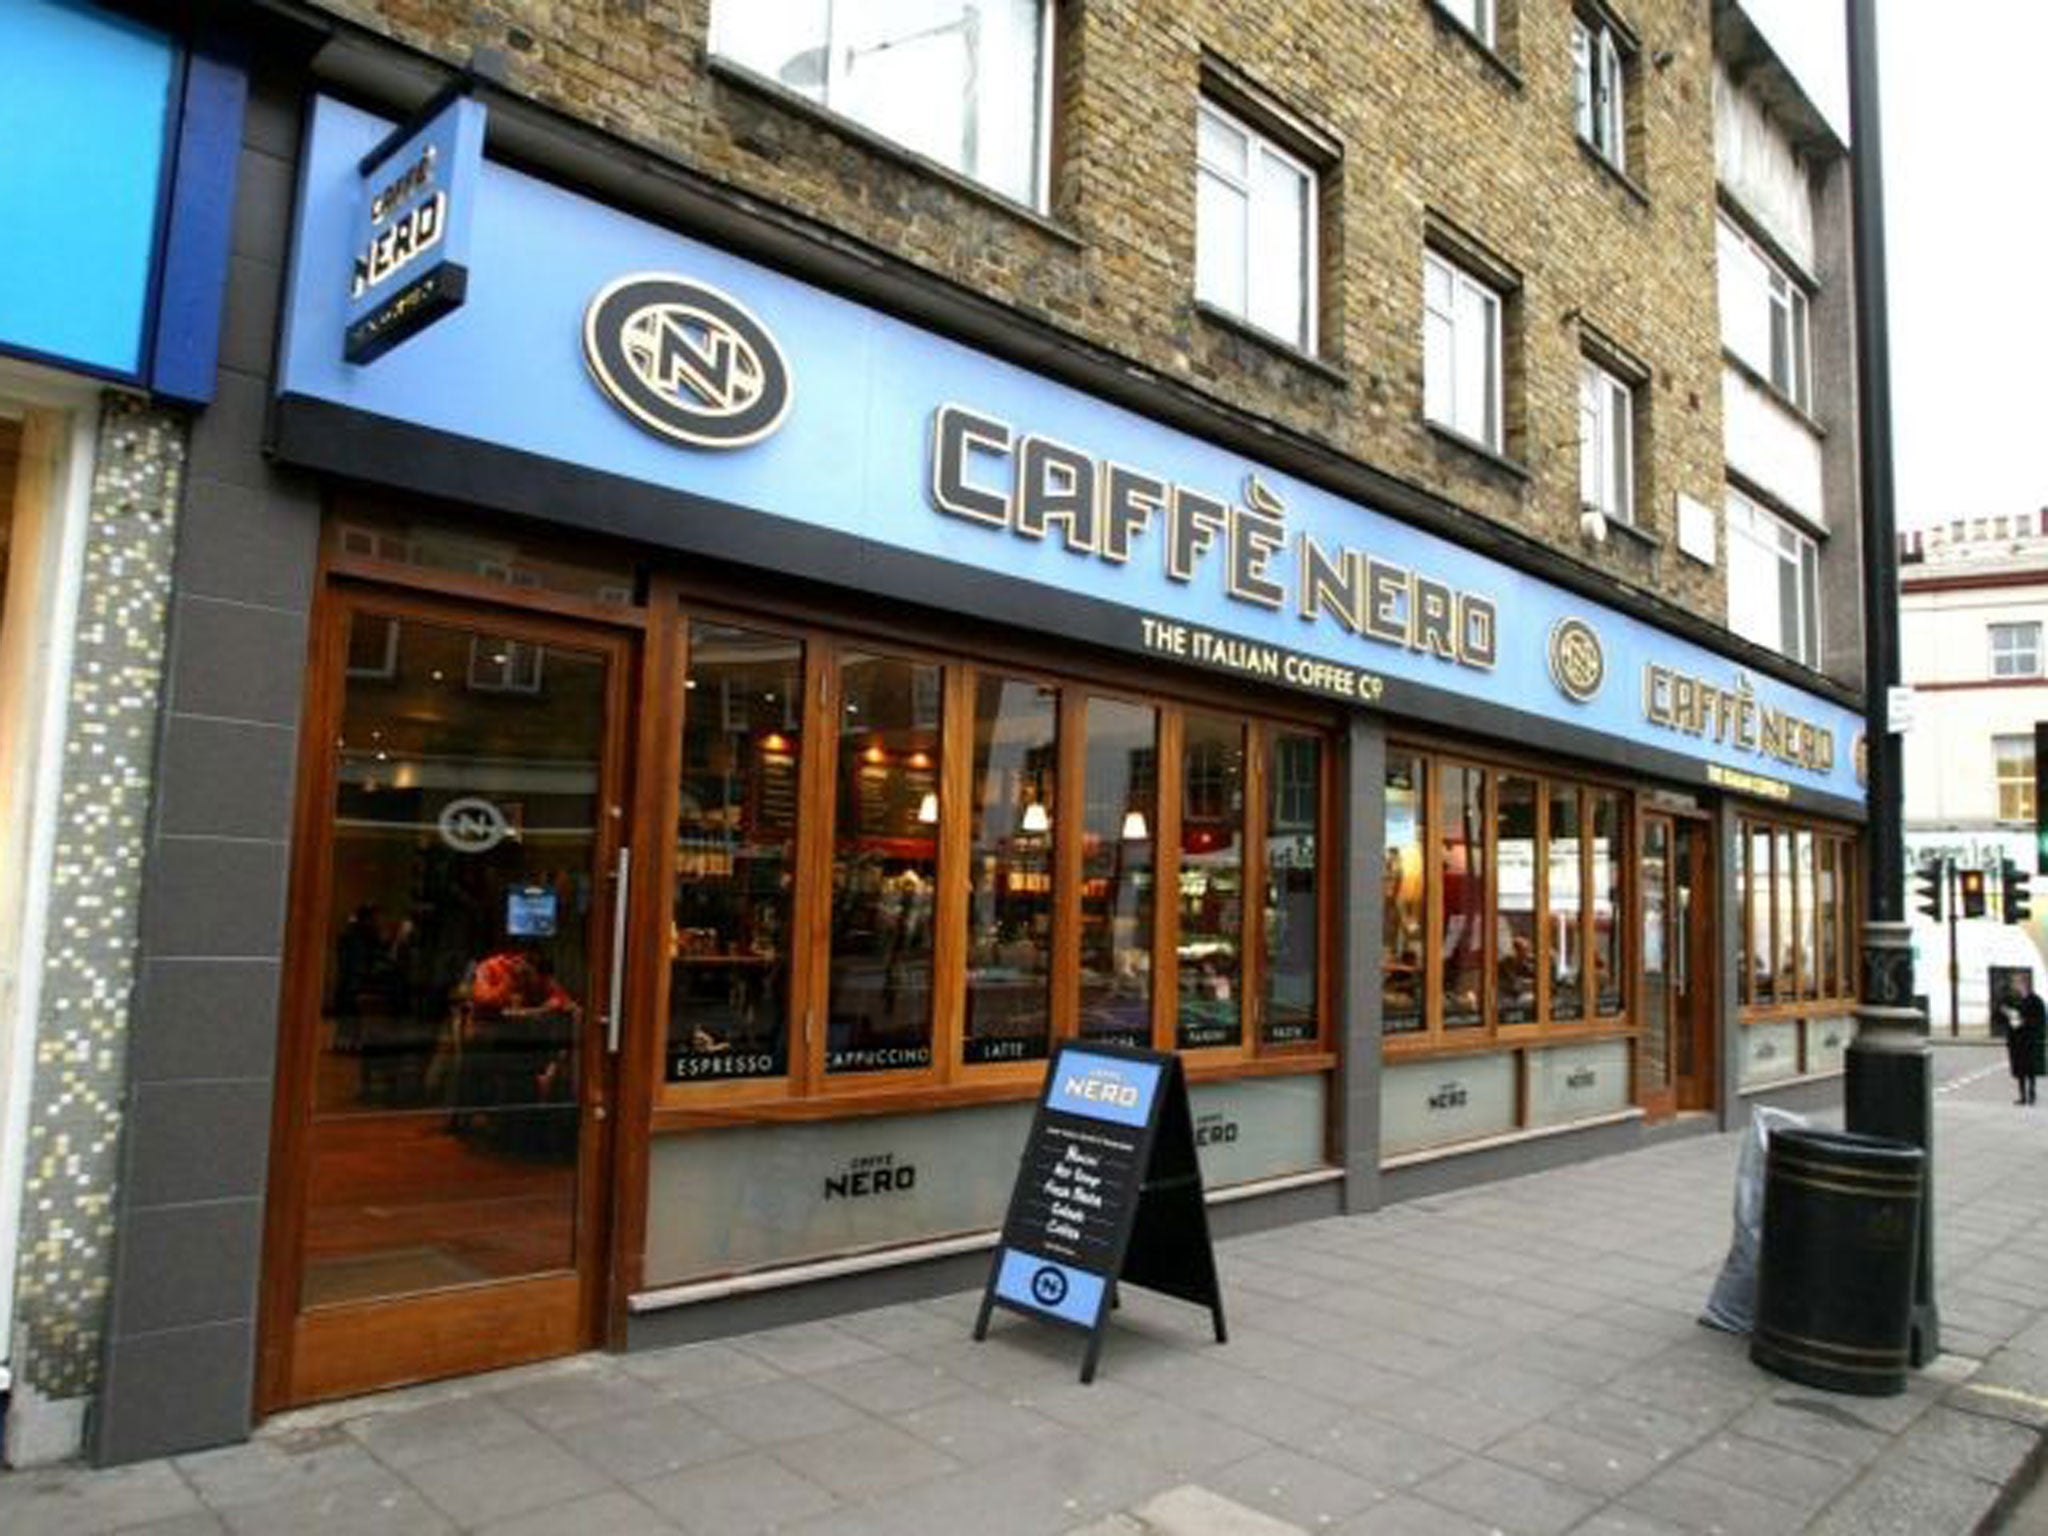 Spend £10 at Caffè Nero and you'll get a £5 credit